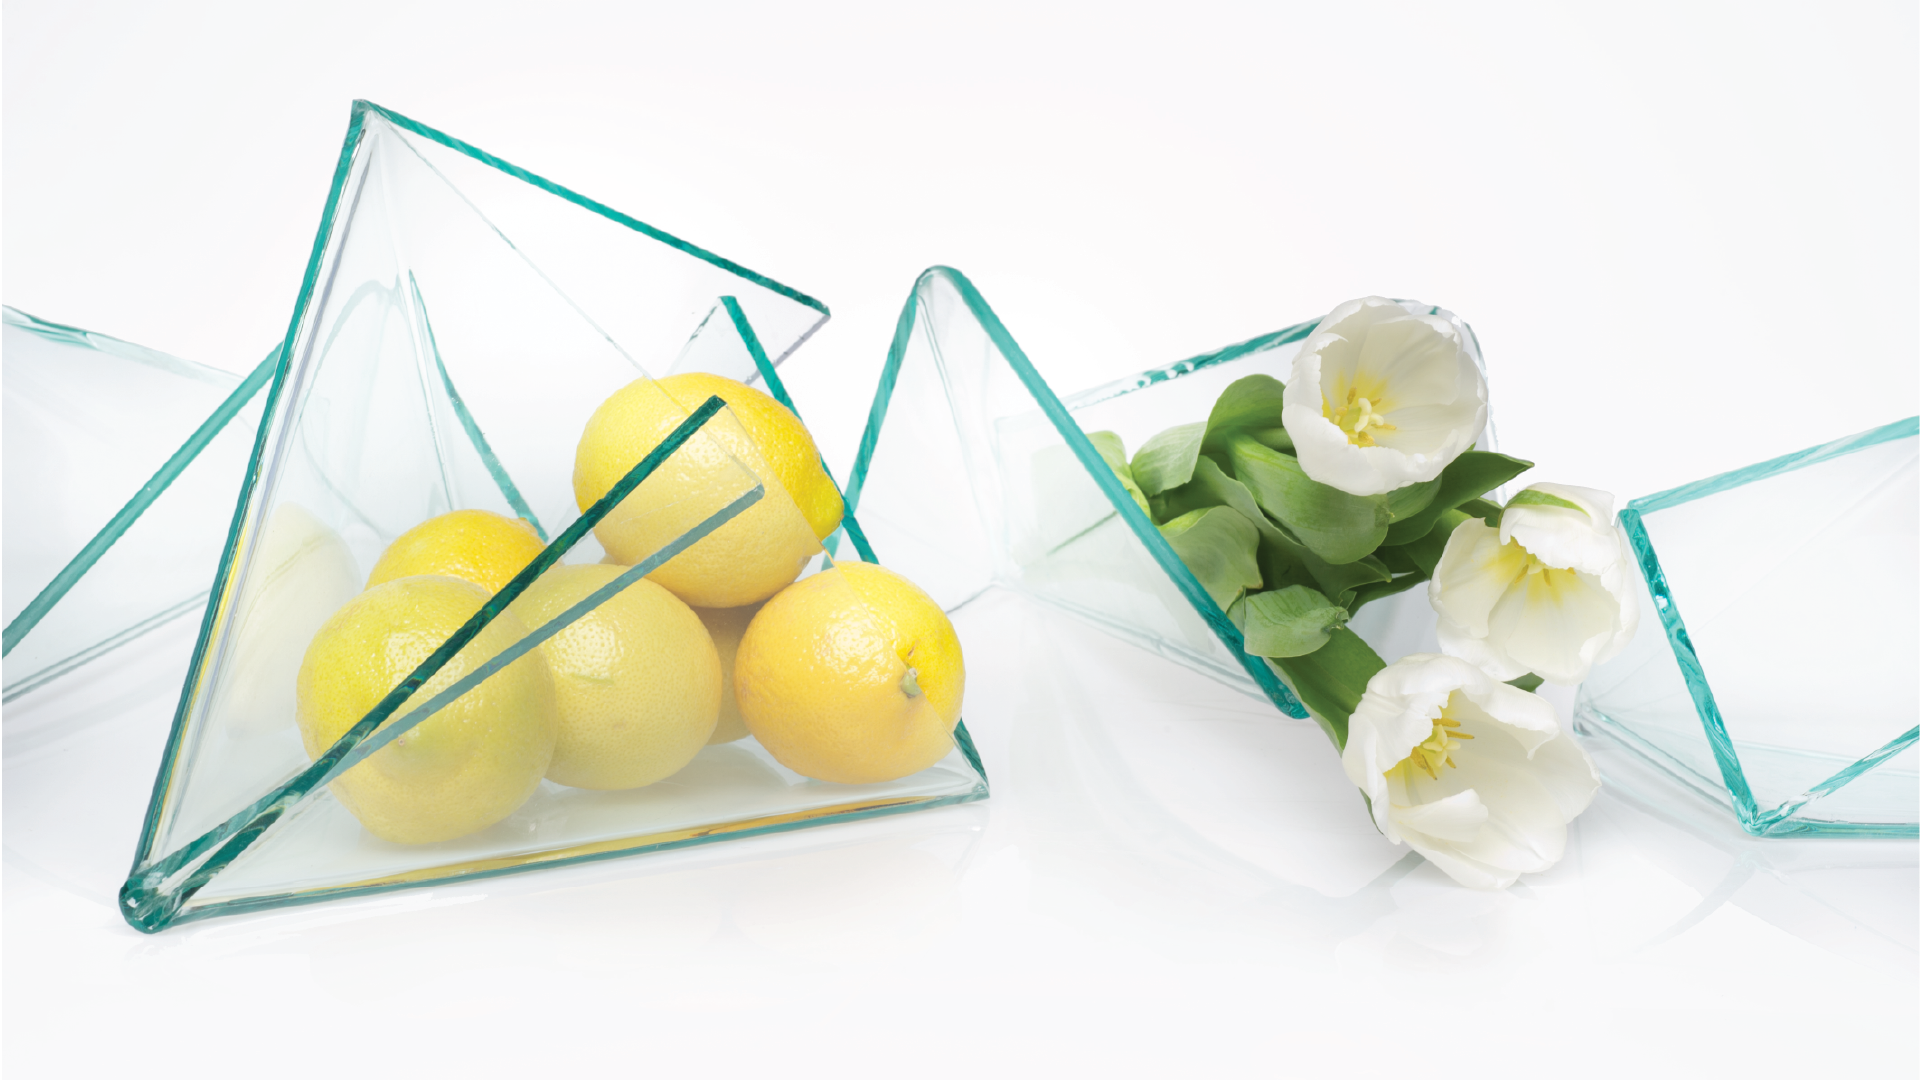 Closer shot of countertop two center-pieces made of folded glass sheets containing limes and flowers.